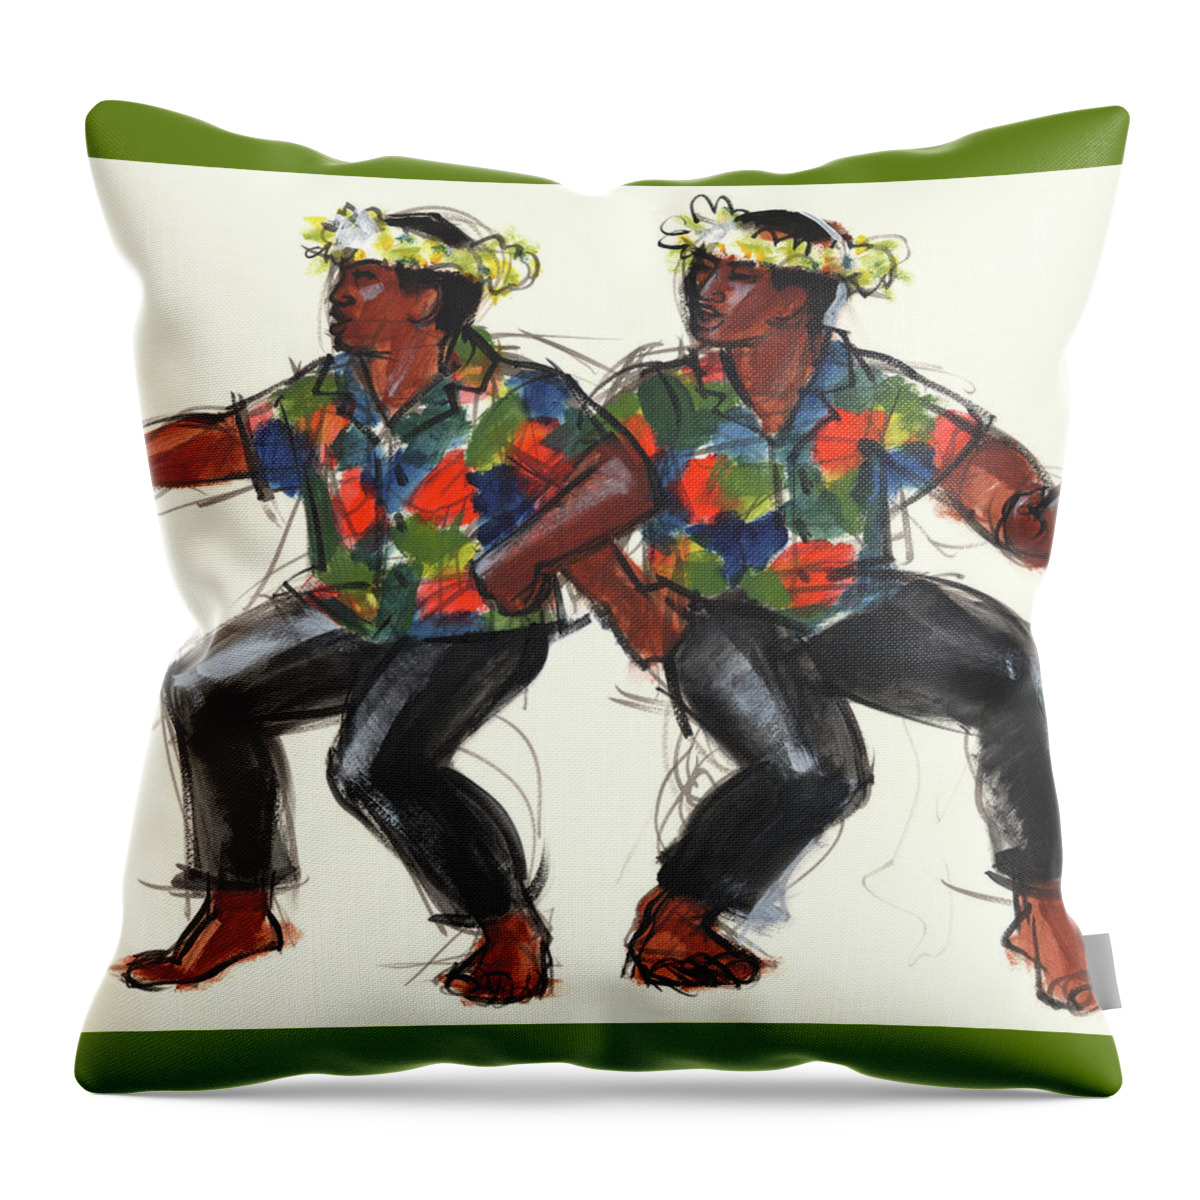 Dance Throw Pillow featuring the painting Cook Islands Ute Dancers by Judith Kunzle